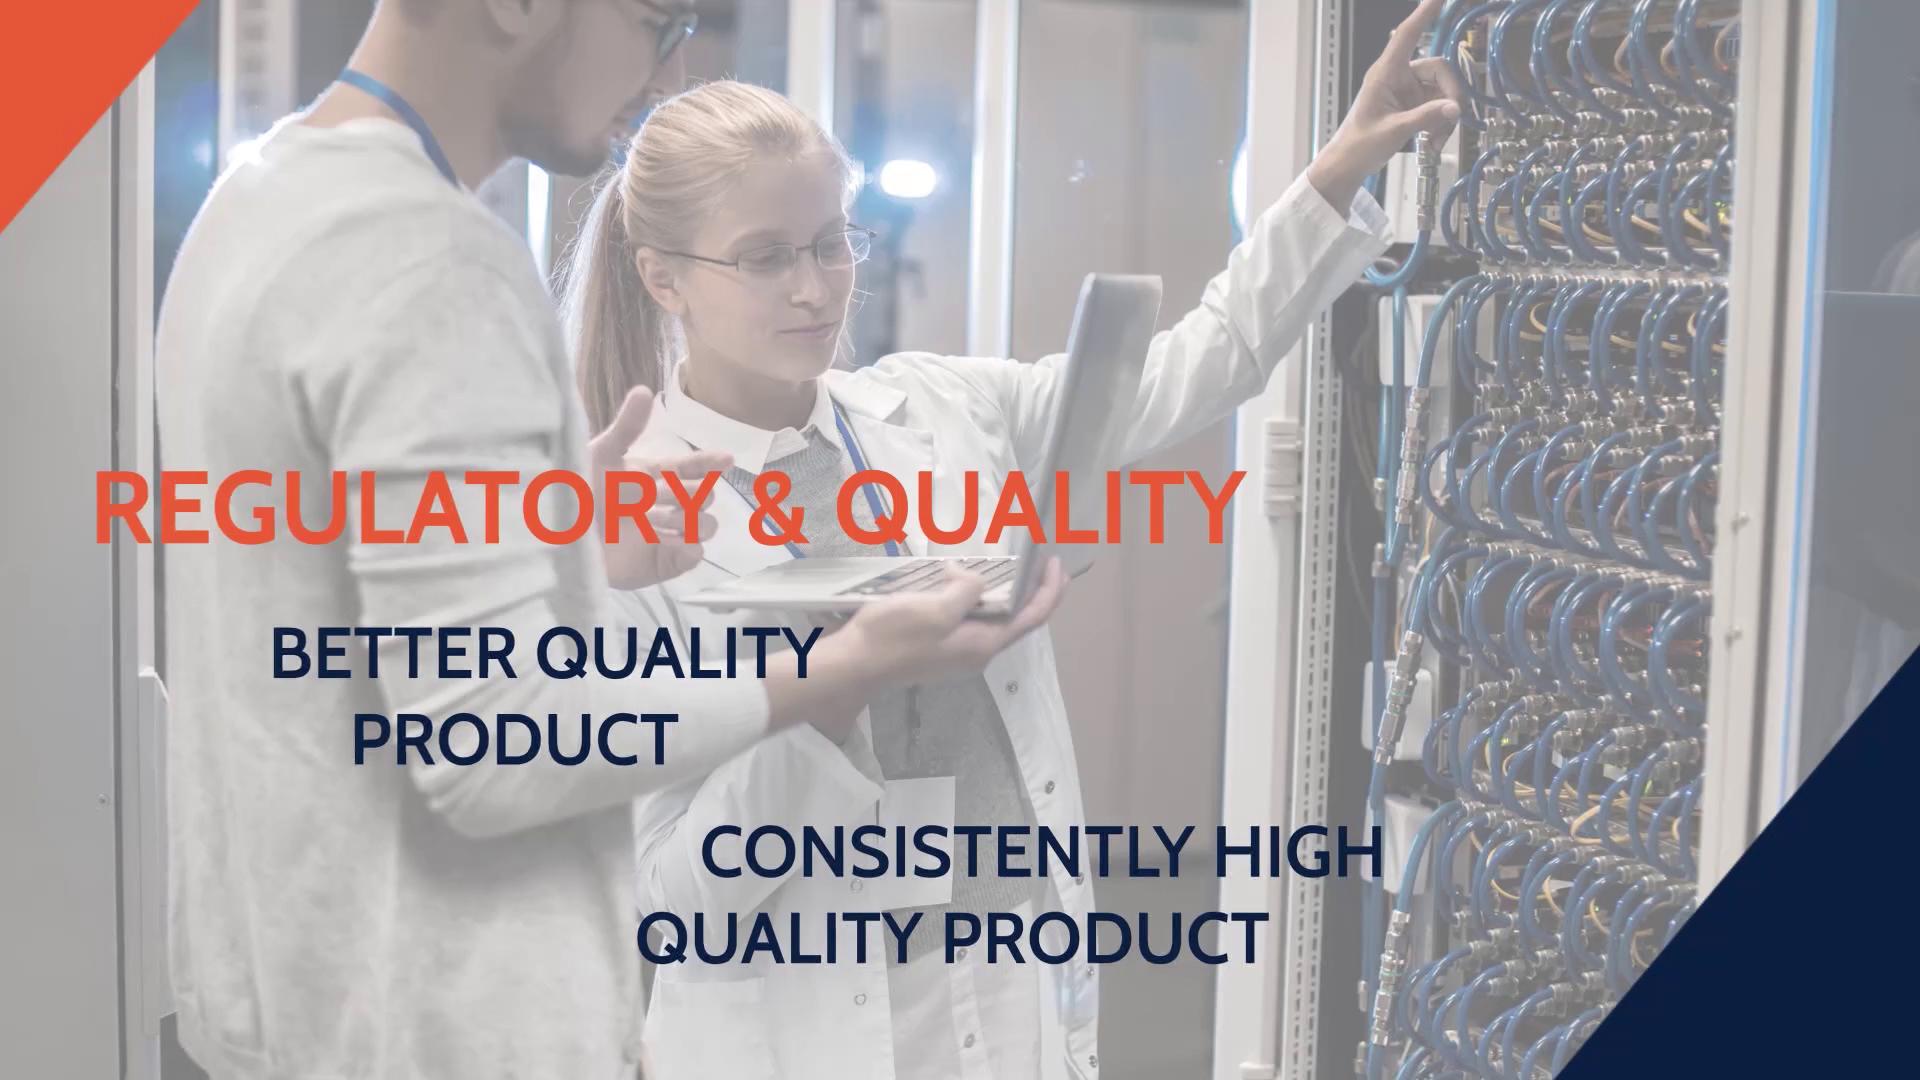 By adopting a PAT enabled control strategy, manufacturers can obtain consistently high-quality products